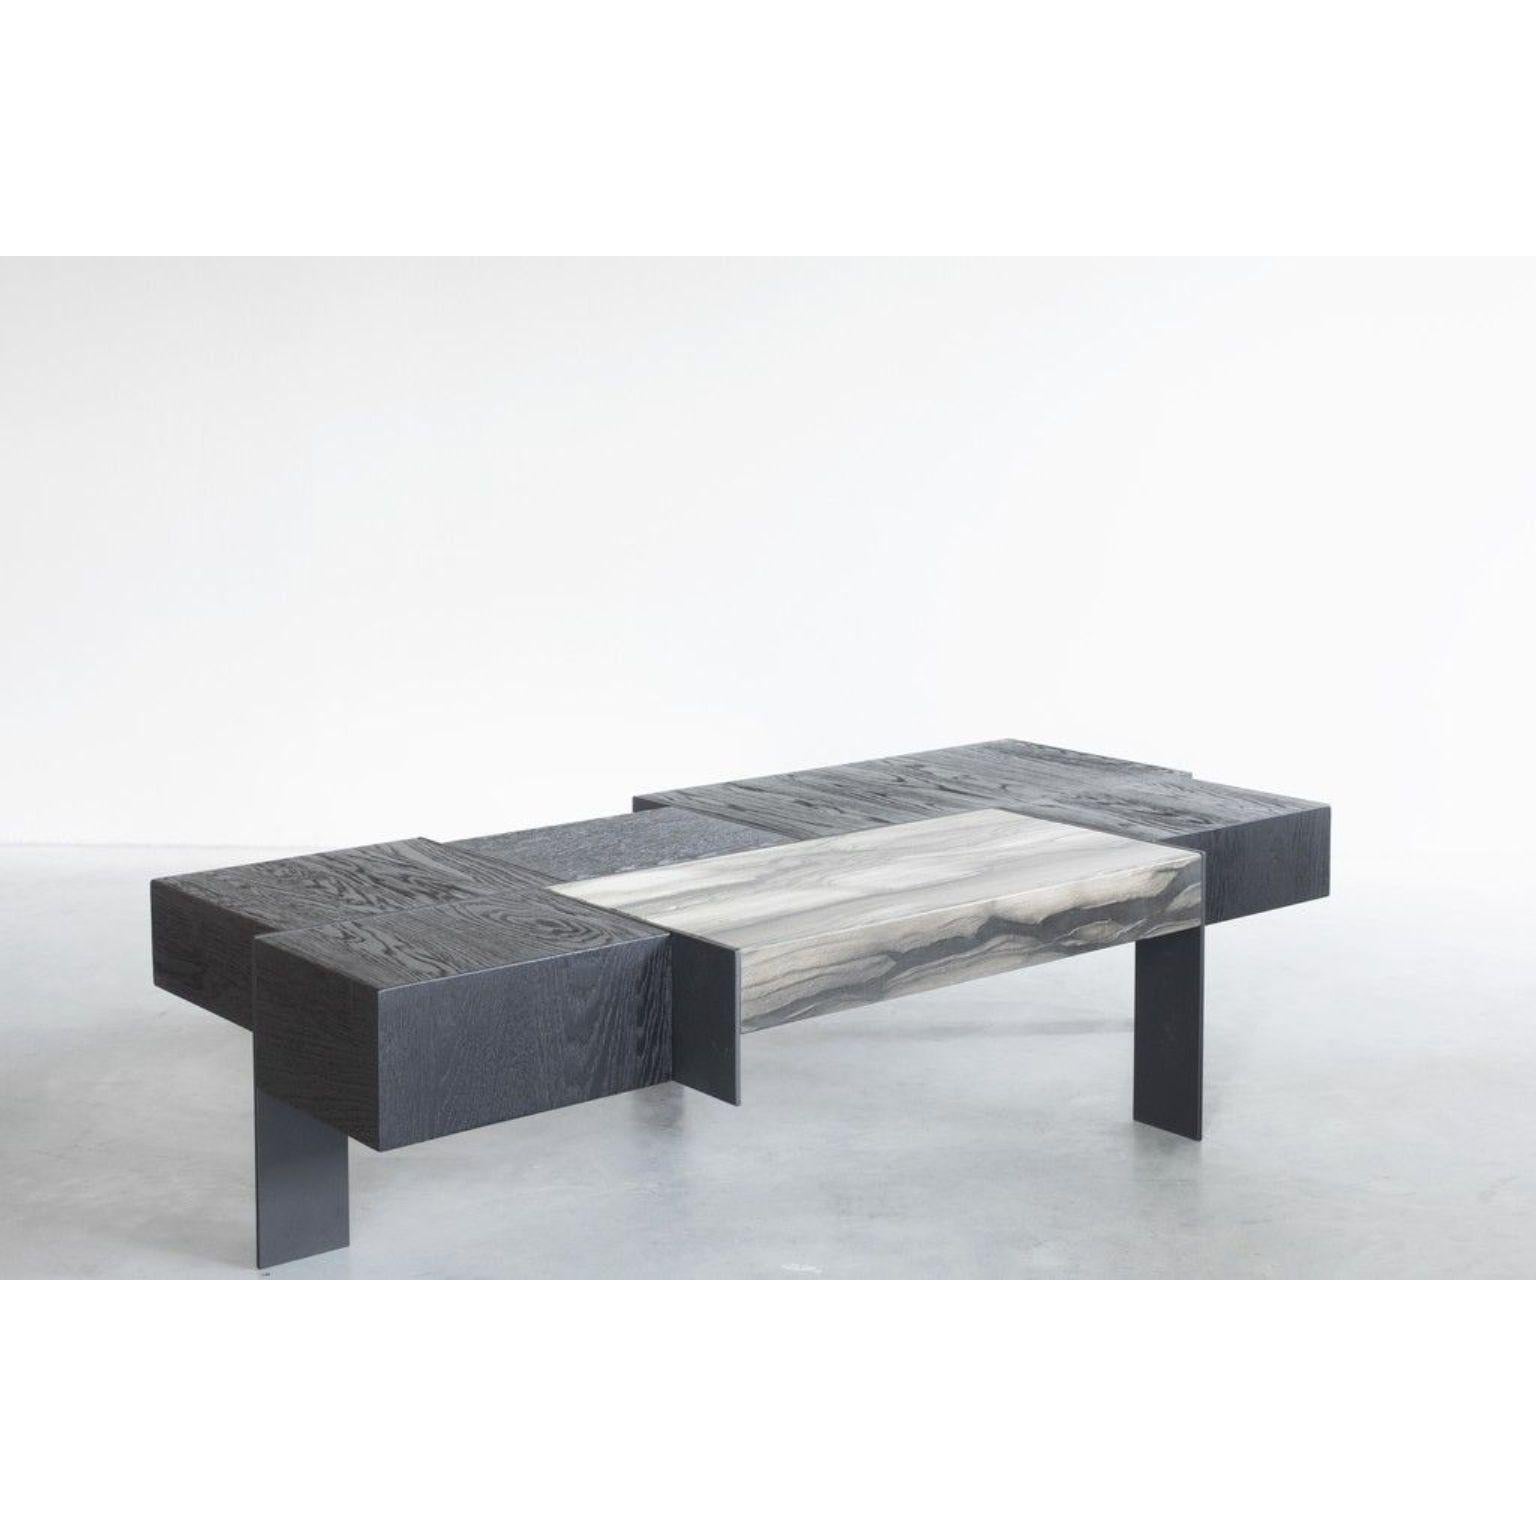 Kitale coffee table by Van Rossum
Dimensions: D164 x W81 x H35 cm
Materials: Oak, stone.

The wood is available in all standard Van Rossum colors, or in a matching finish to customer’s own sample.
The stone is available in Carrara Marble or